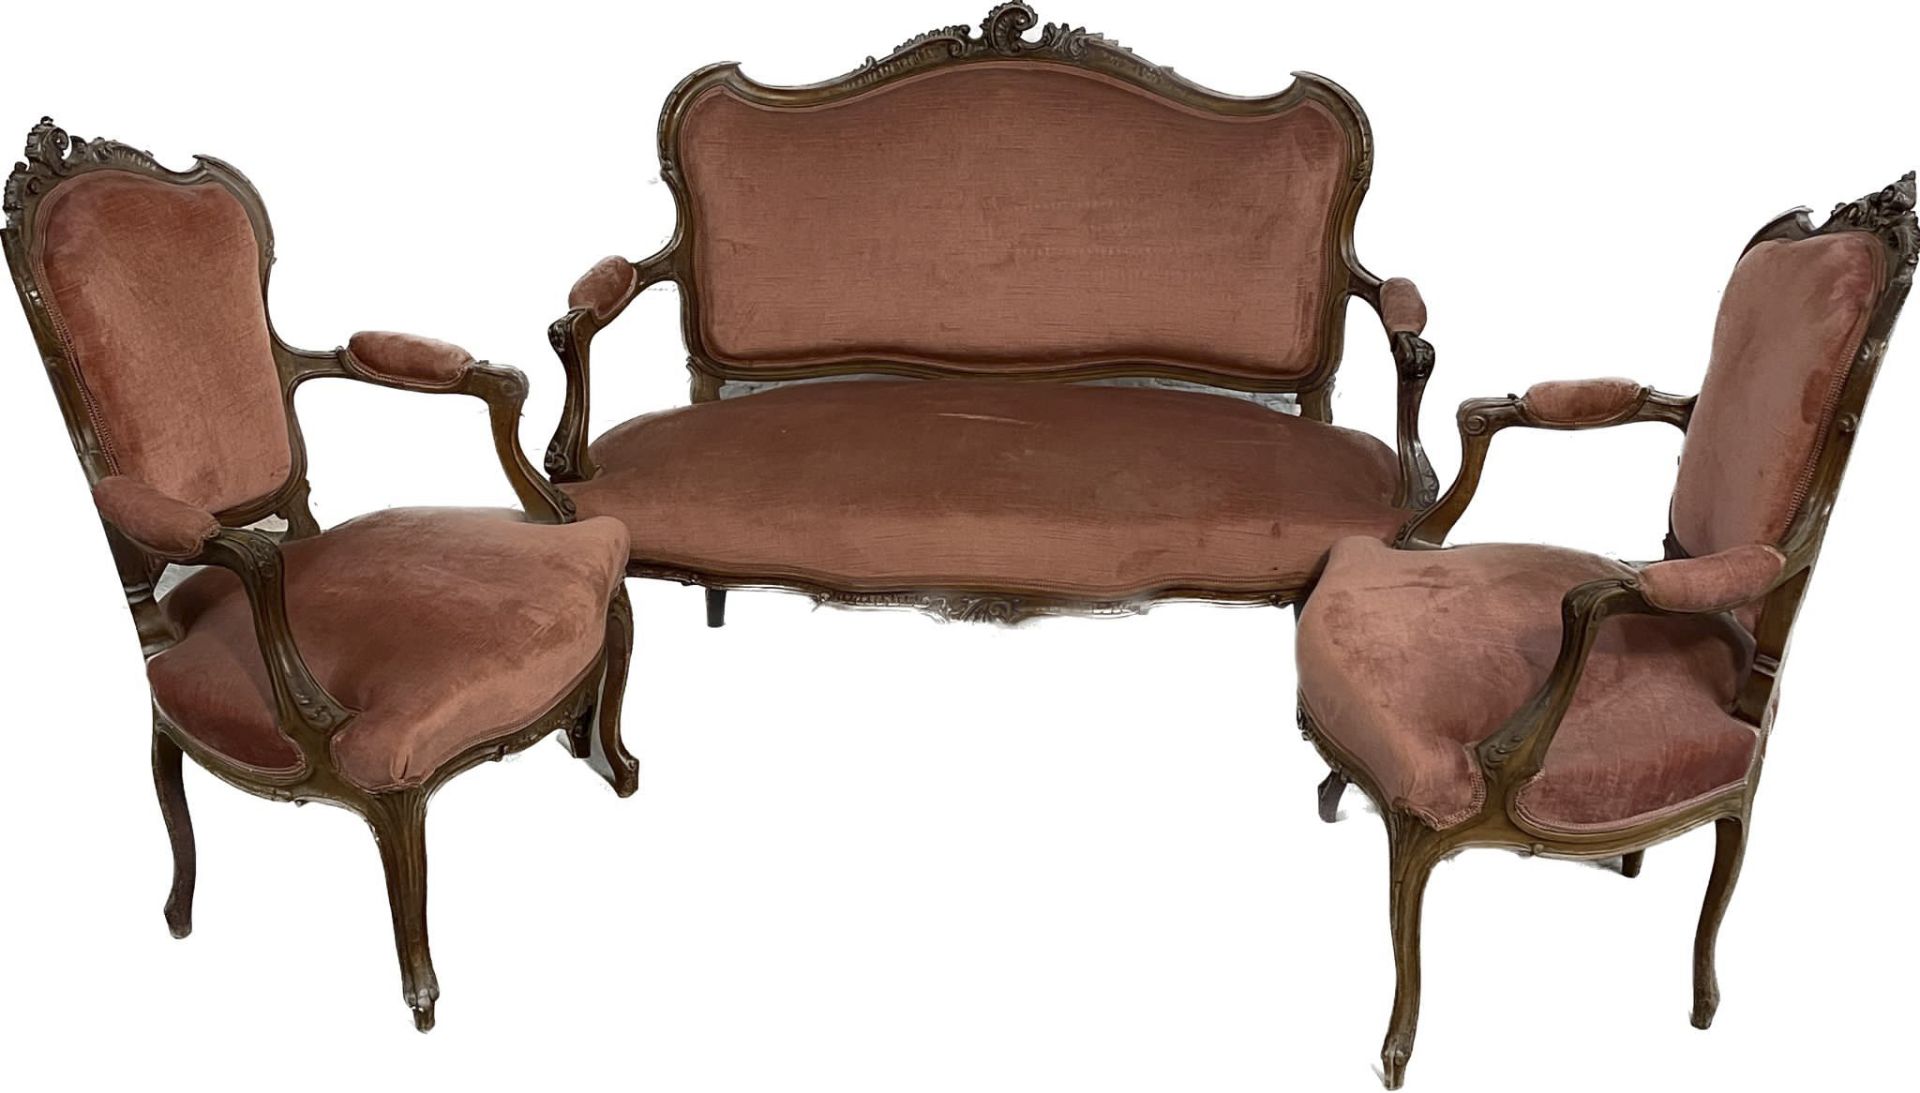 Louis-Phillipe settee, circa 1860/70, solid walnut, consisting of a sofa and two armchairs, sofa: